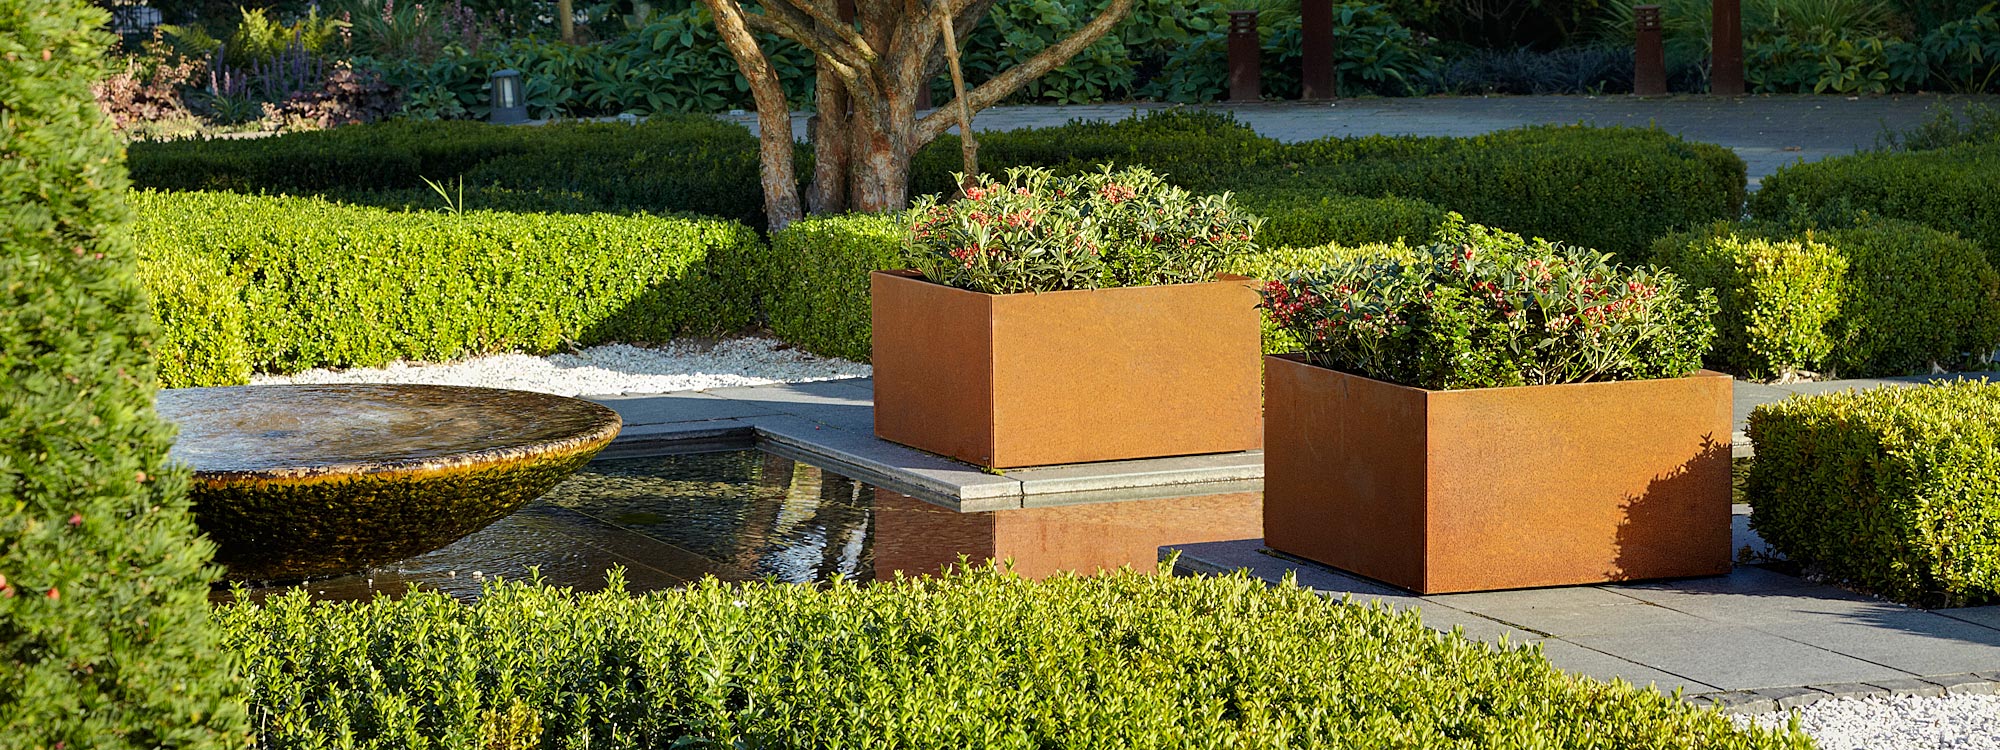 Thallo modern geometric planter is a powder coated or corten plant pot with watertight planting insert by Flora contract planter company.